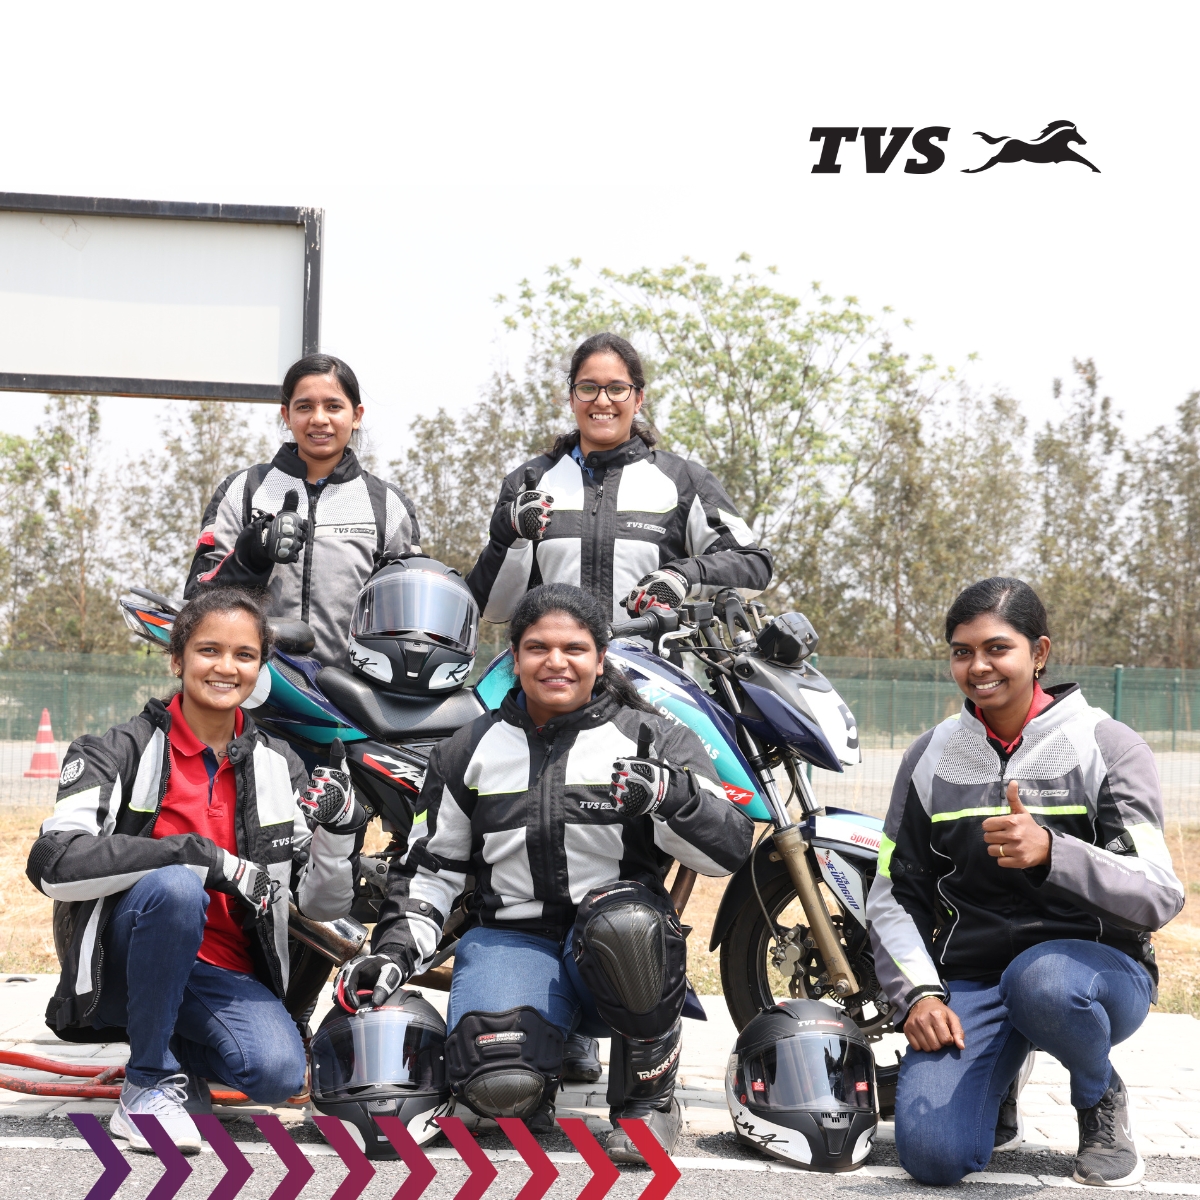 We recently conducted the TVS Apache Riding Experience for Women. Our female employees embraced the thrill of TVS Apache, breaking barriers and fostering confidence. Inspiring women, fulfilling dreams! #TVSRacing #EmpowerWomen #TVSMotor #TVSRacing #DreamsOnWheels